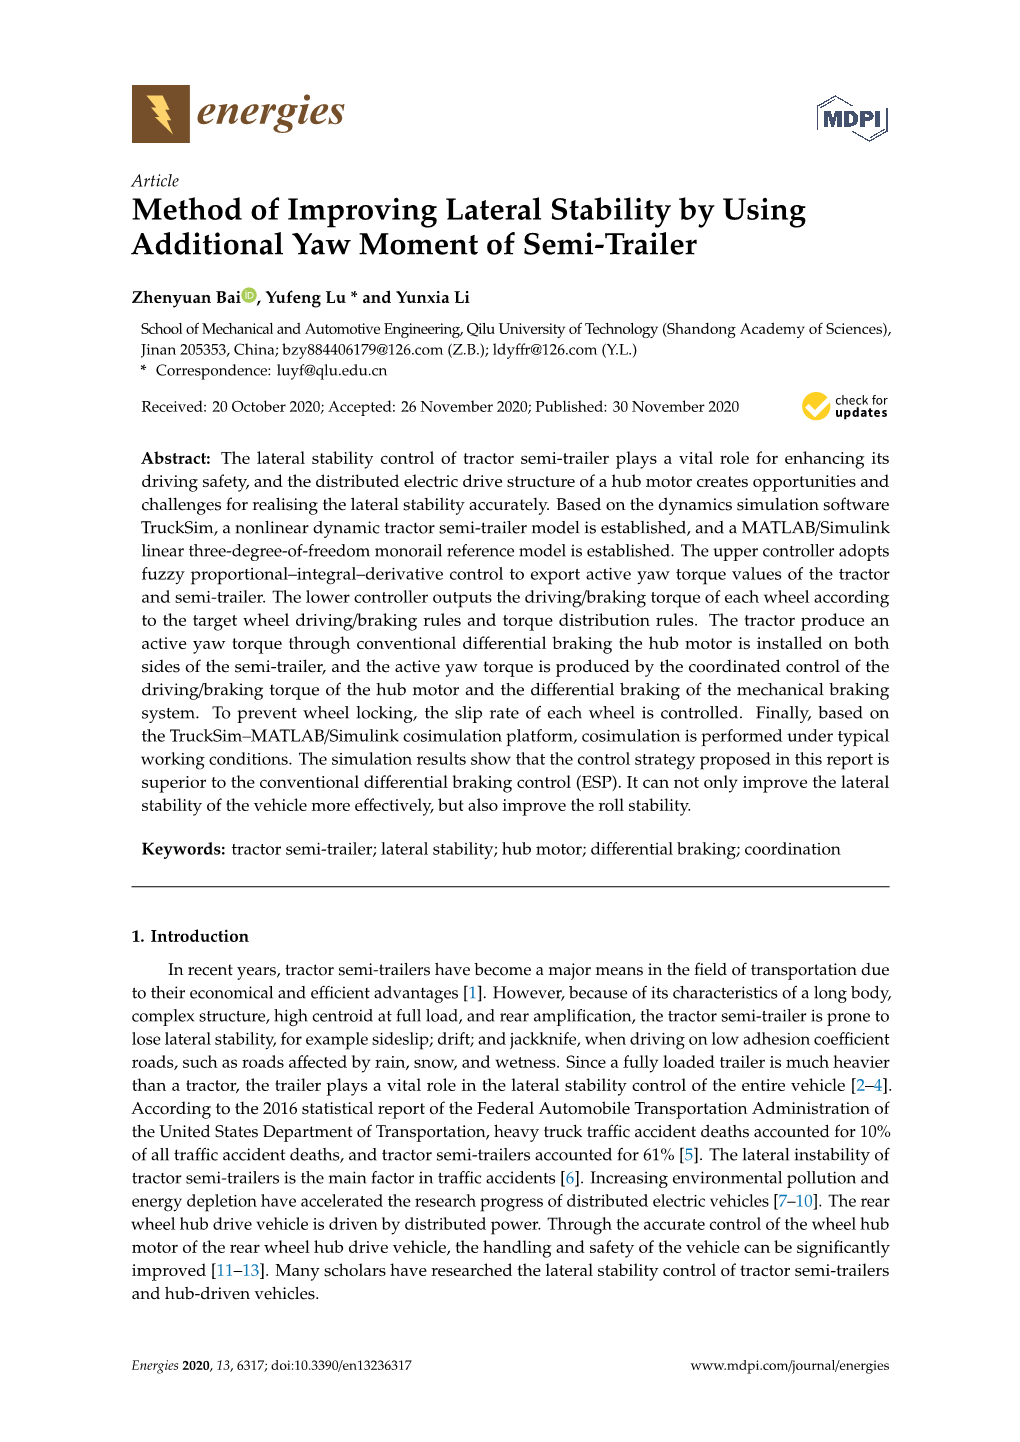 Method of Improving Lateral Stability by Using Additional Yaw Moment of Semi-Trailer